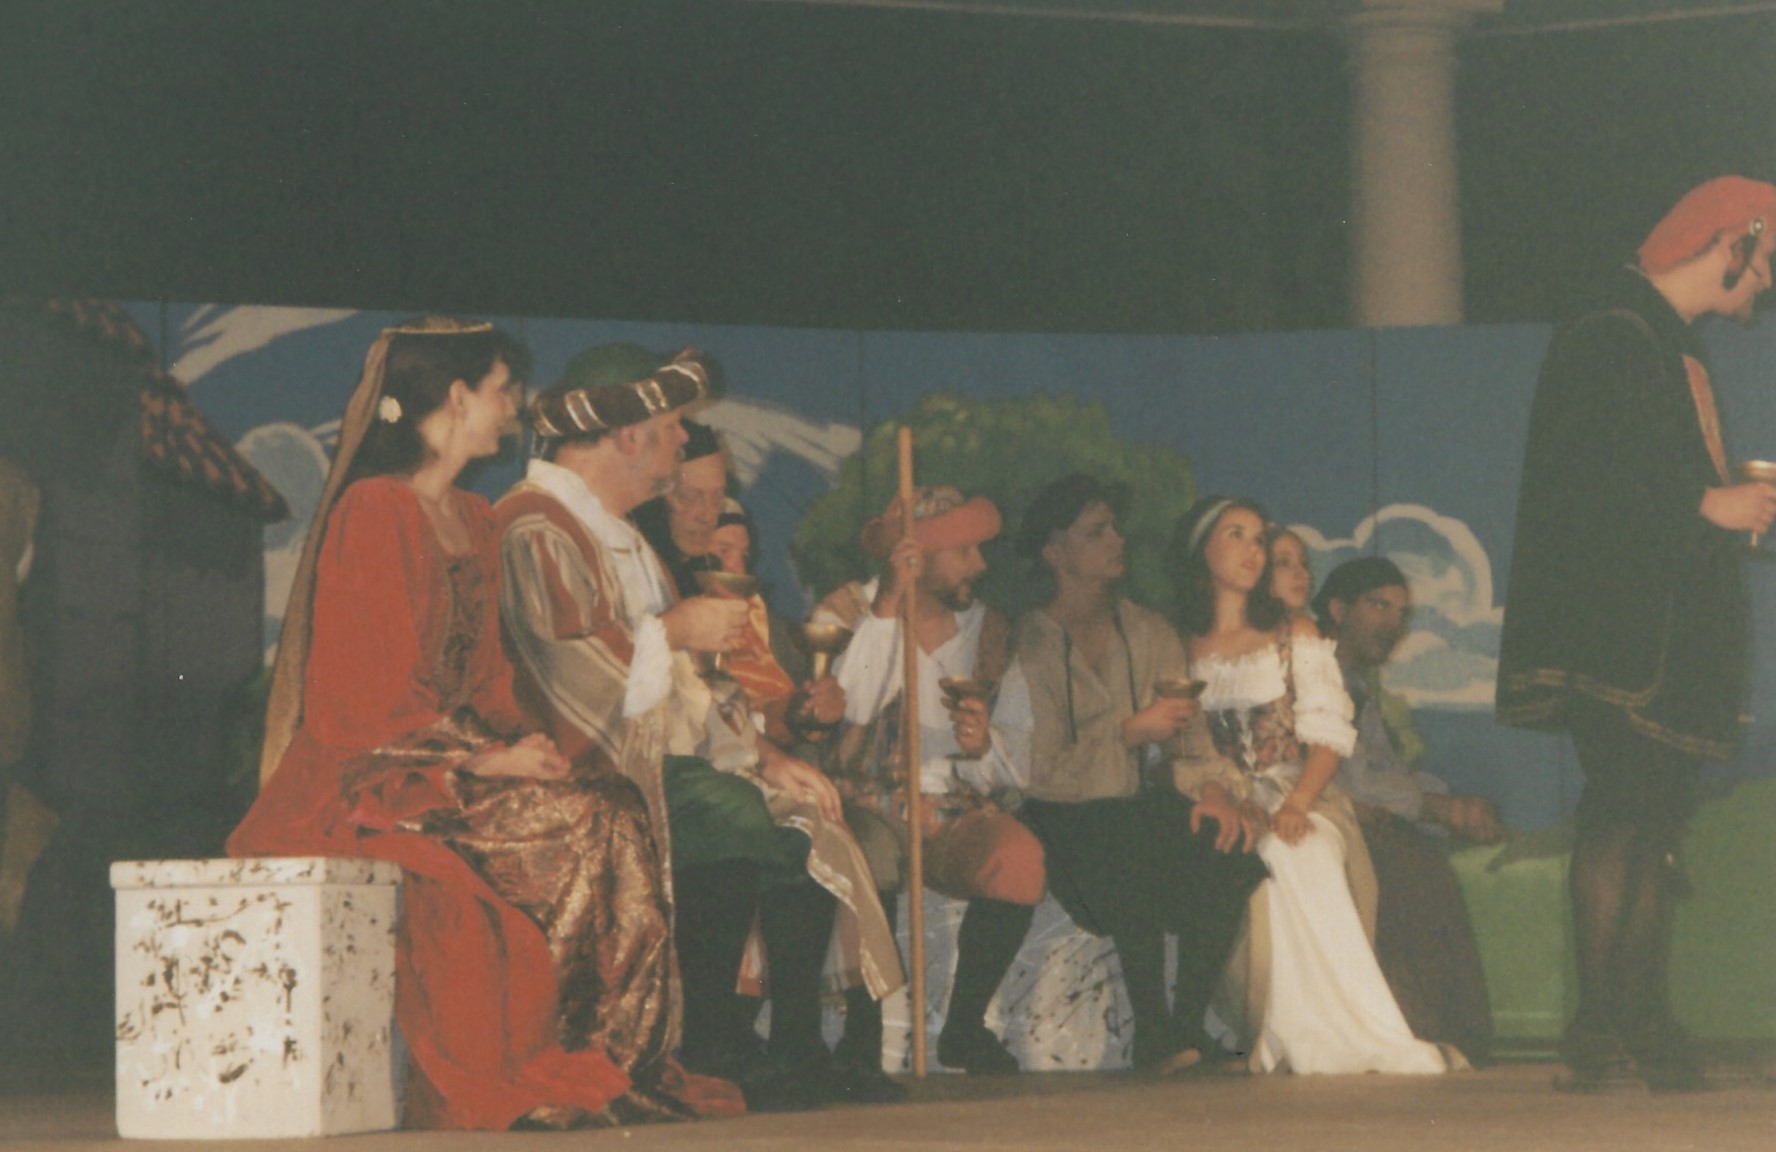 2001 - Taming of the Shrew